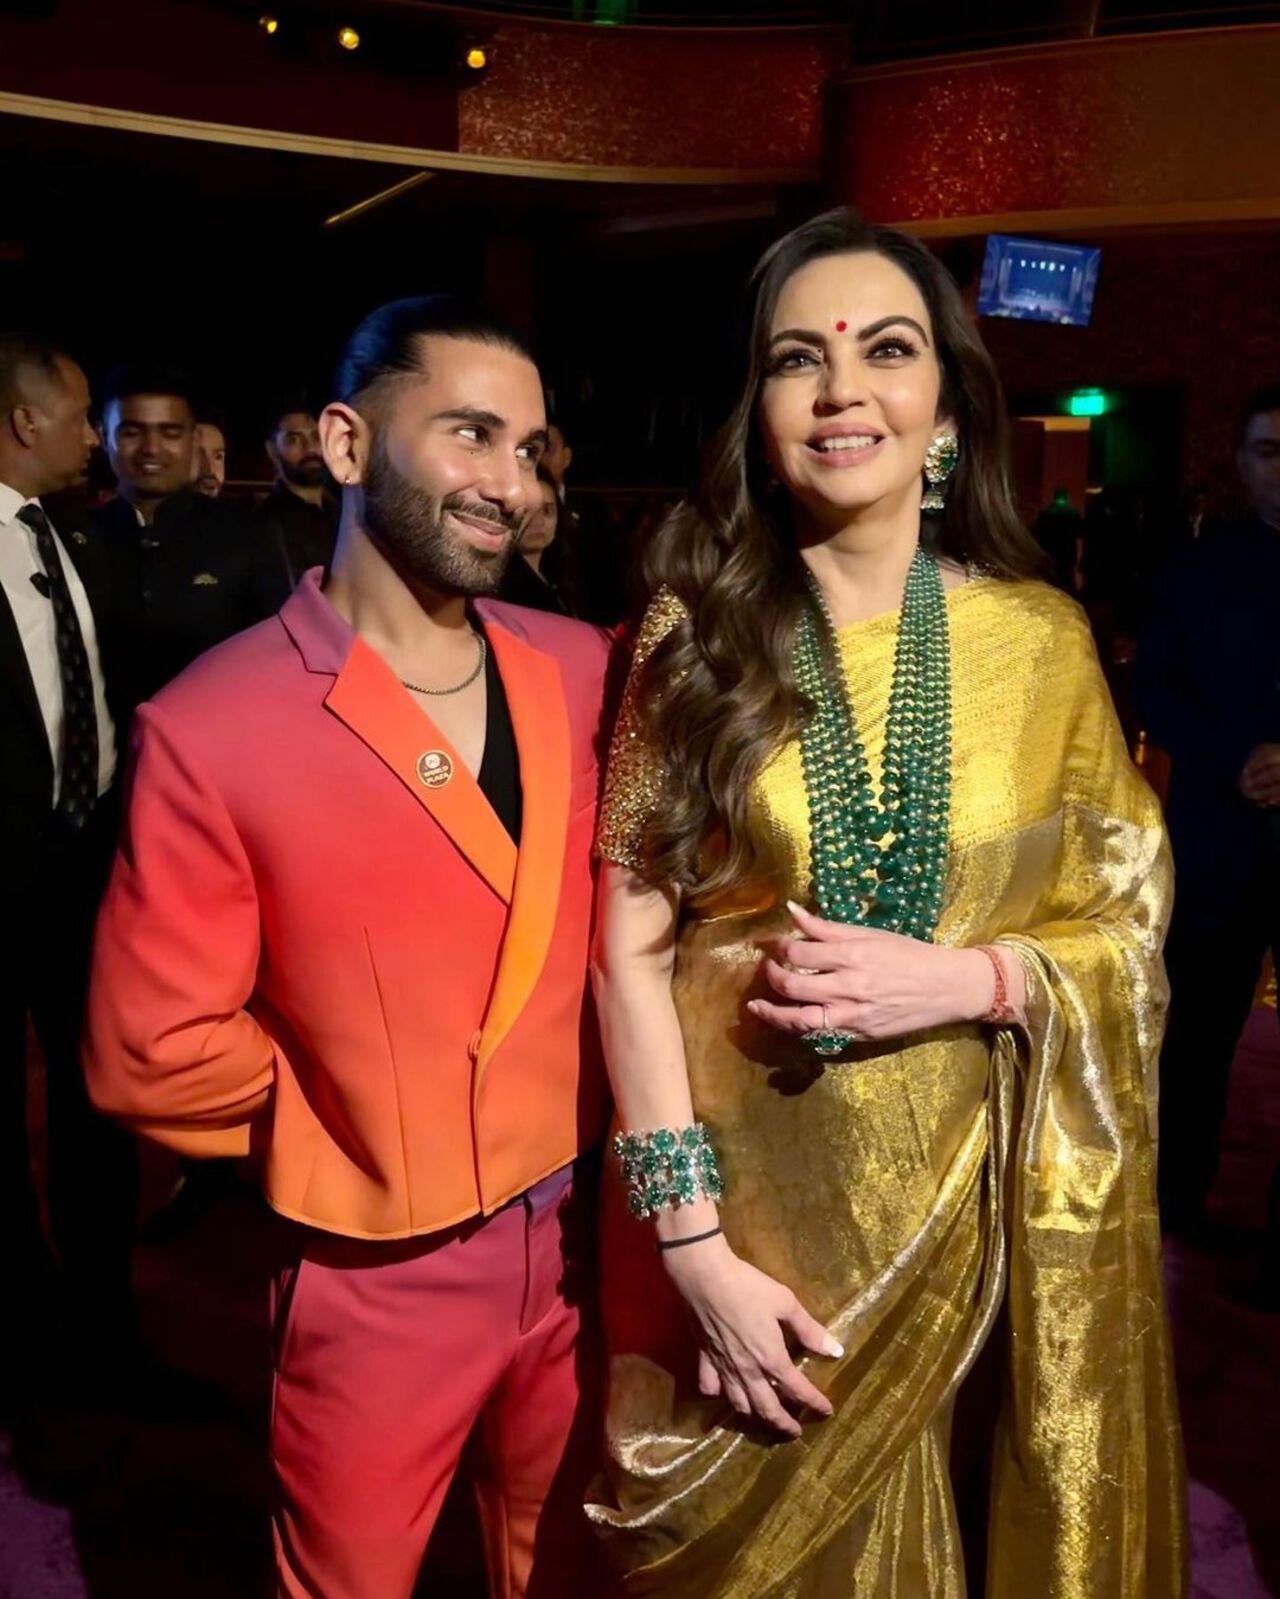 Orry sparkles in a suit with all shades of red and poses beside the beautiful Nita Ambani